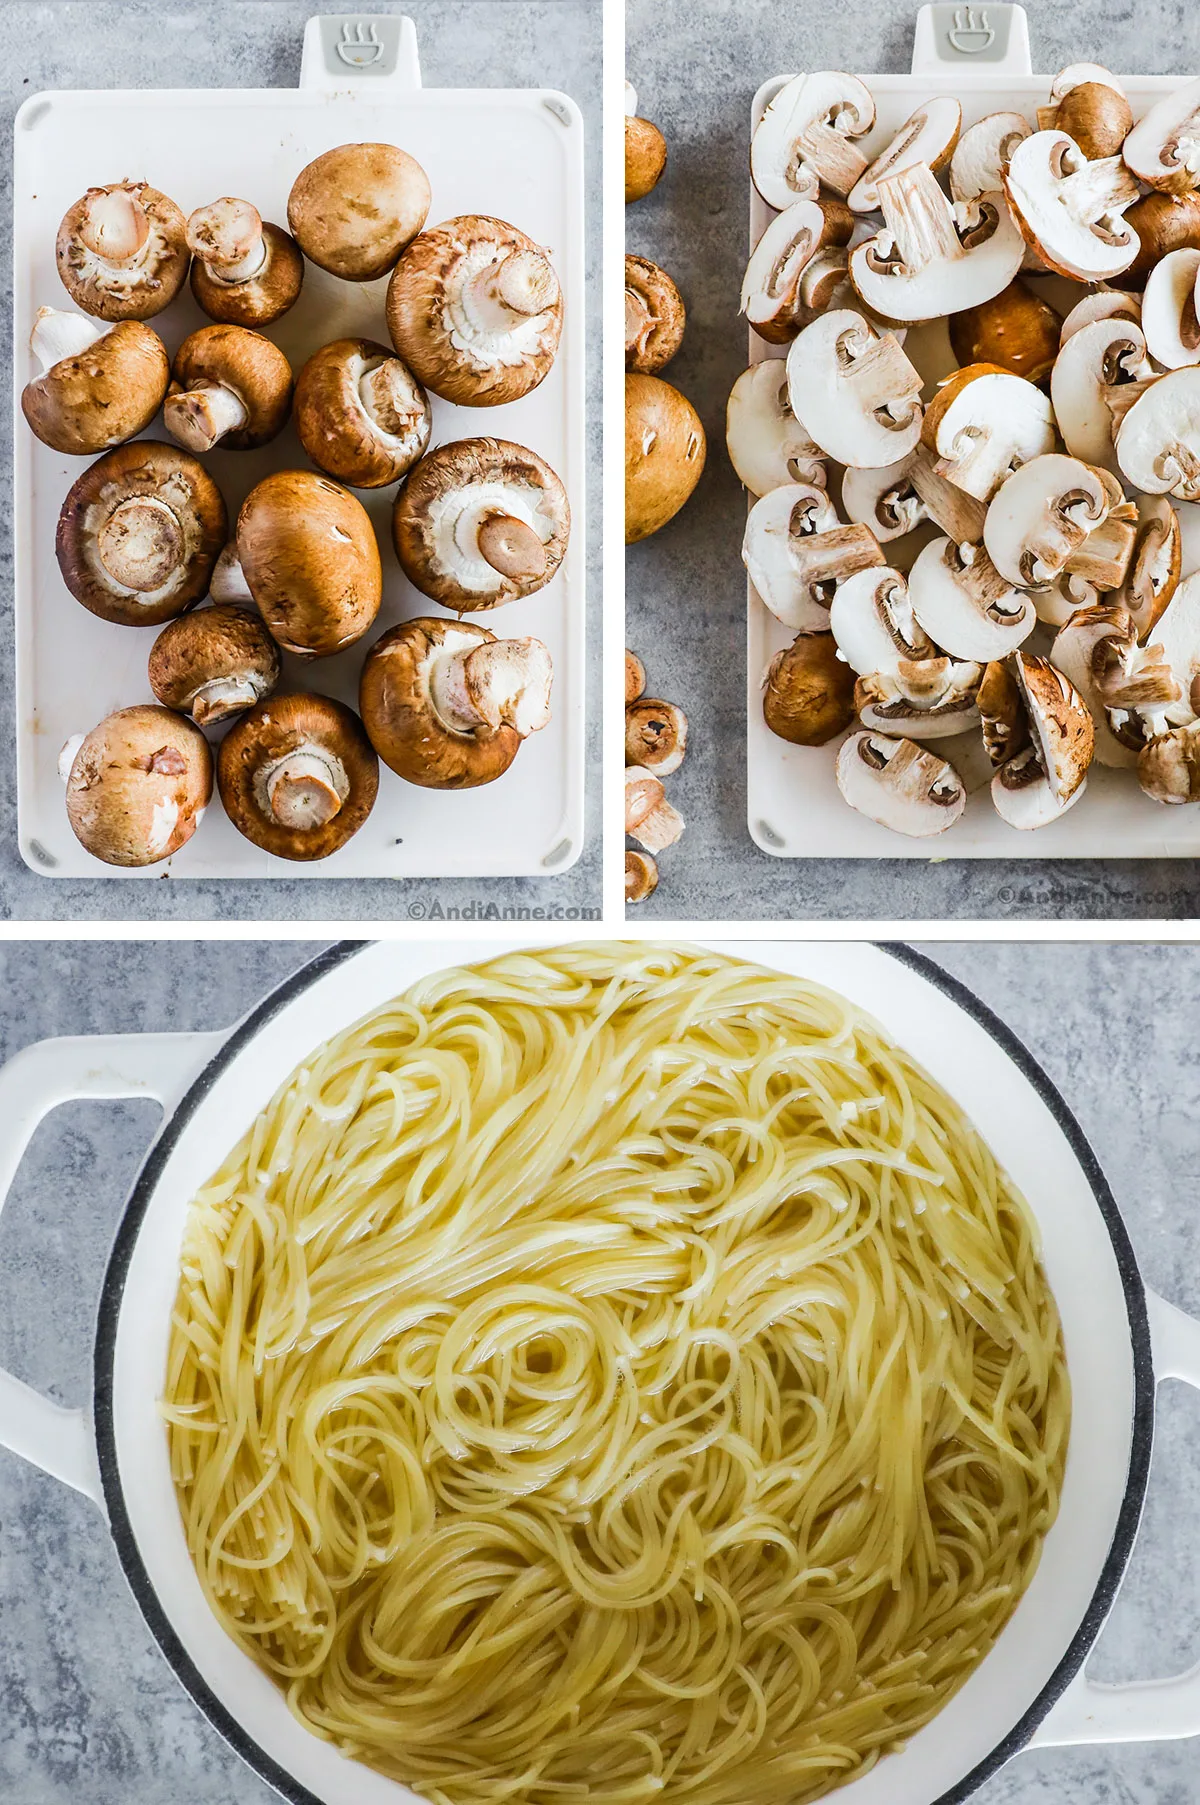 Fresh cremini mushrooms on a cutting board, then same mushrooms sliced, and a pot of cooked spaghetti noodles